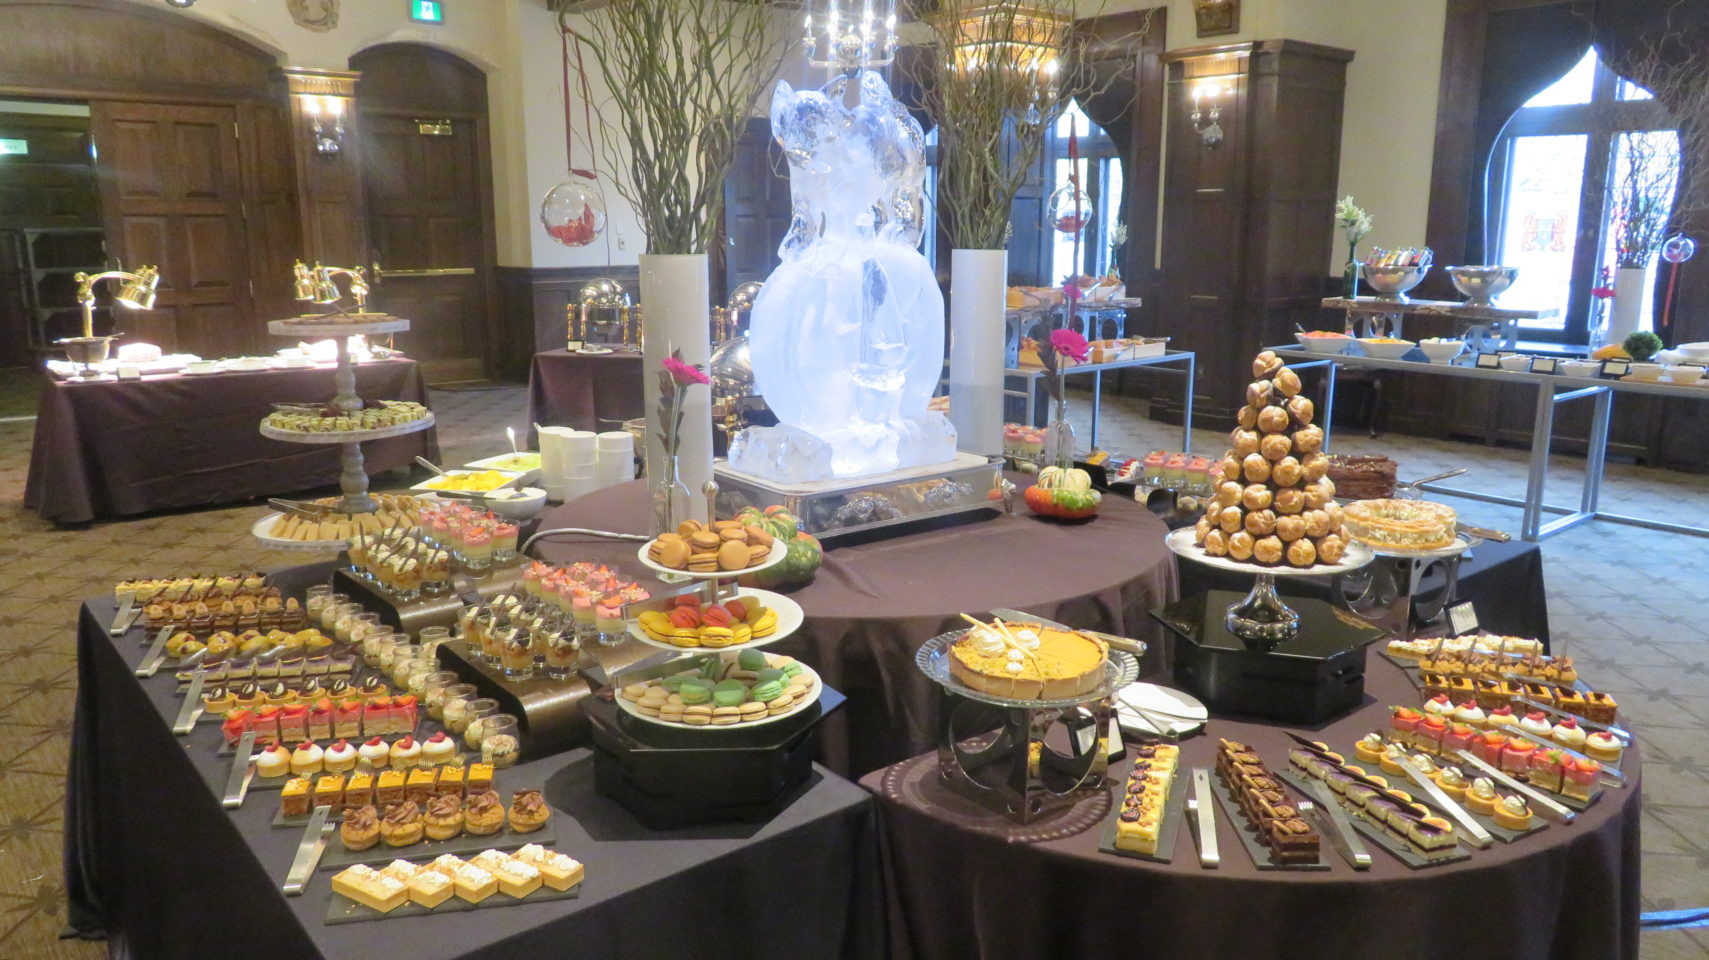 The Dessert Table at the Sunday Brunch of the Fairmont Le Chateau Frontenac